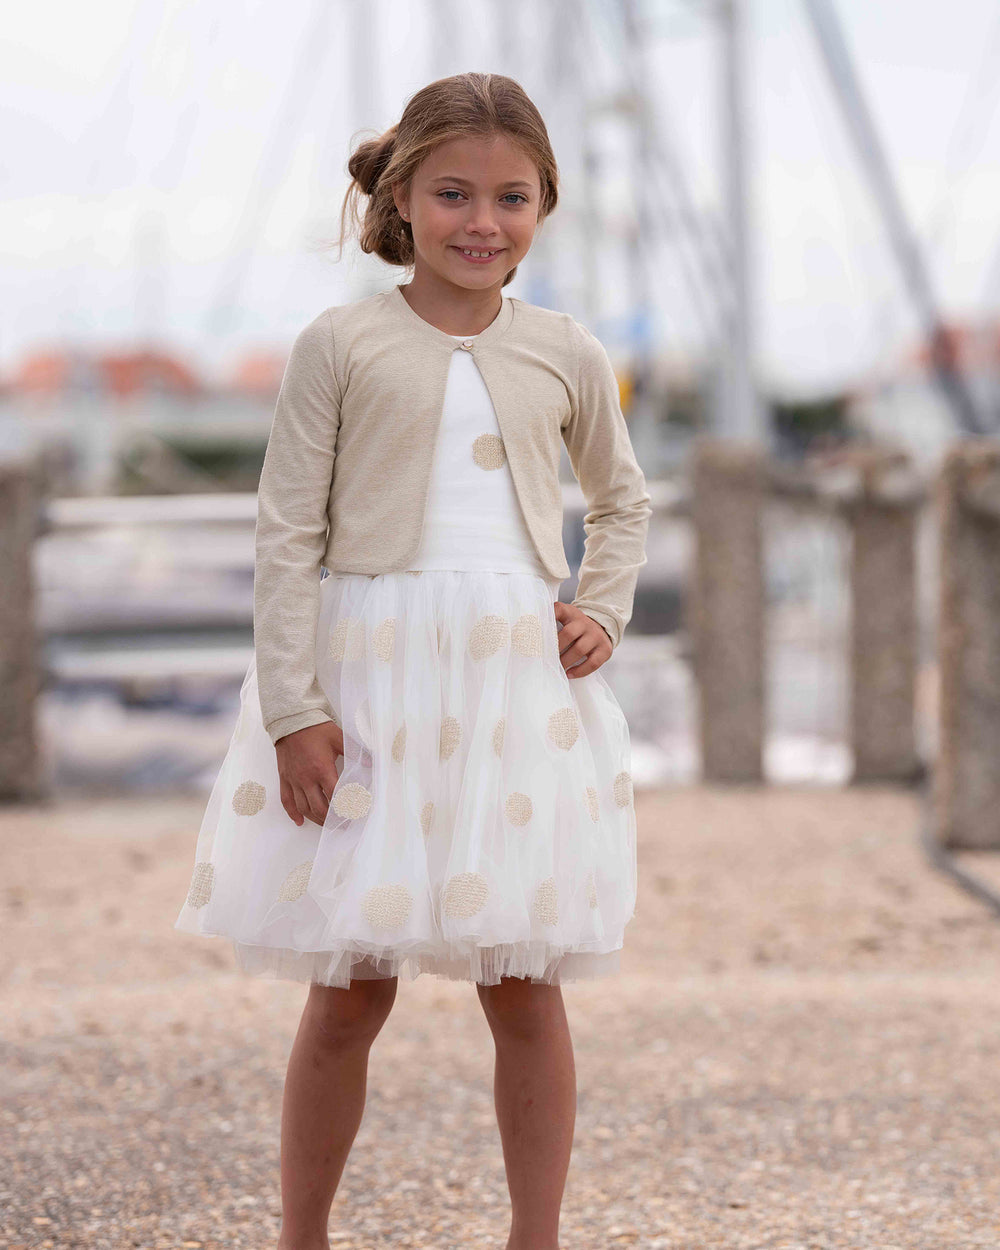 Pearl white tulle dress with gold dots and matching cardigan